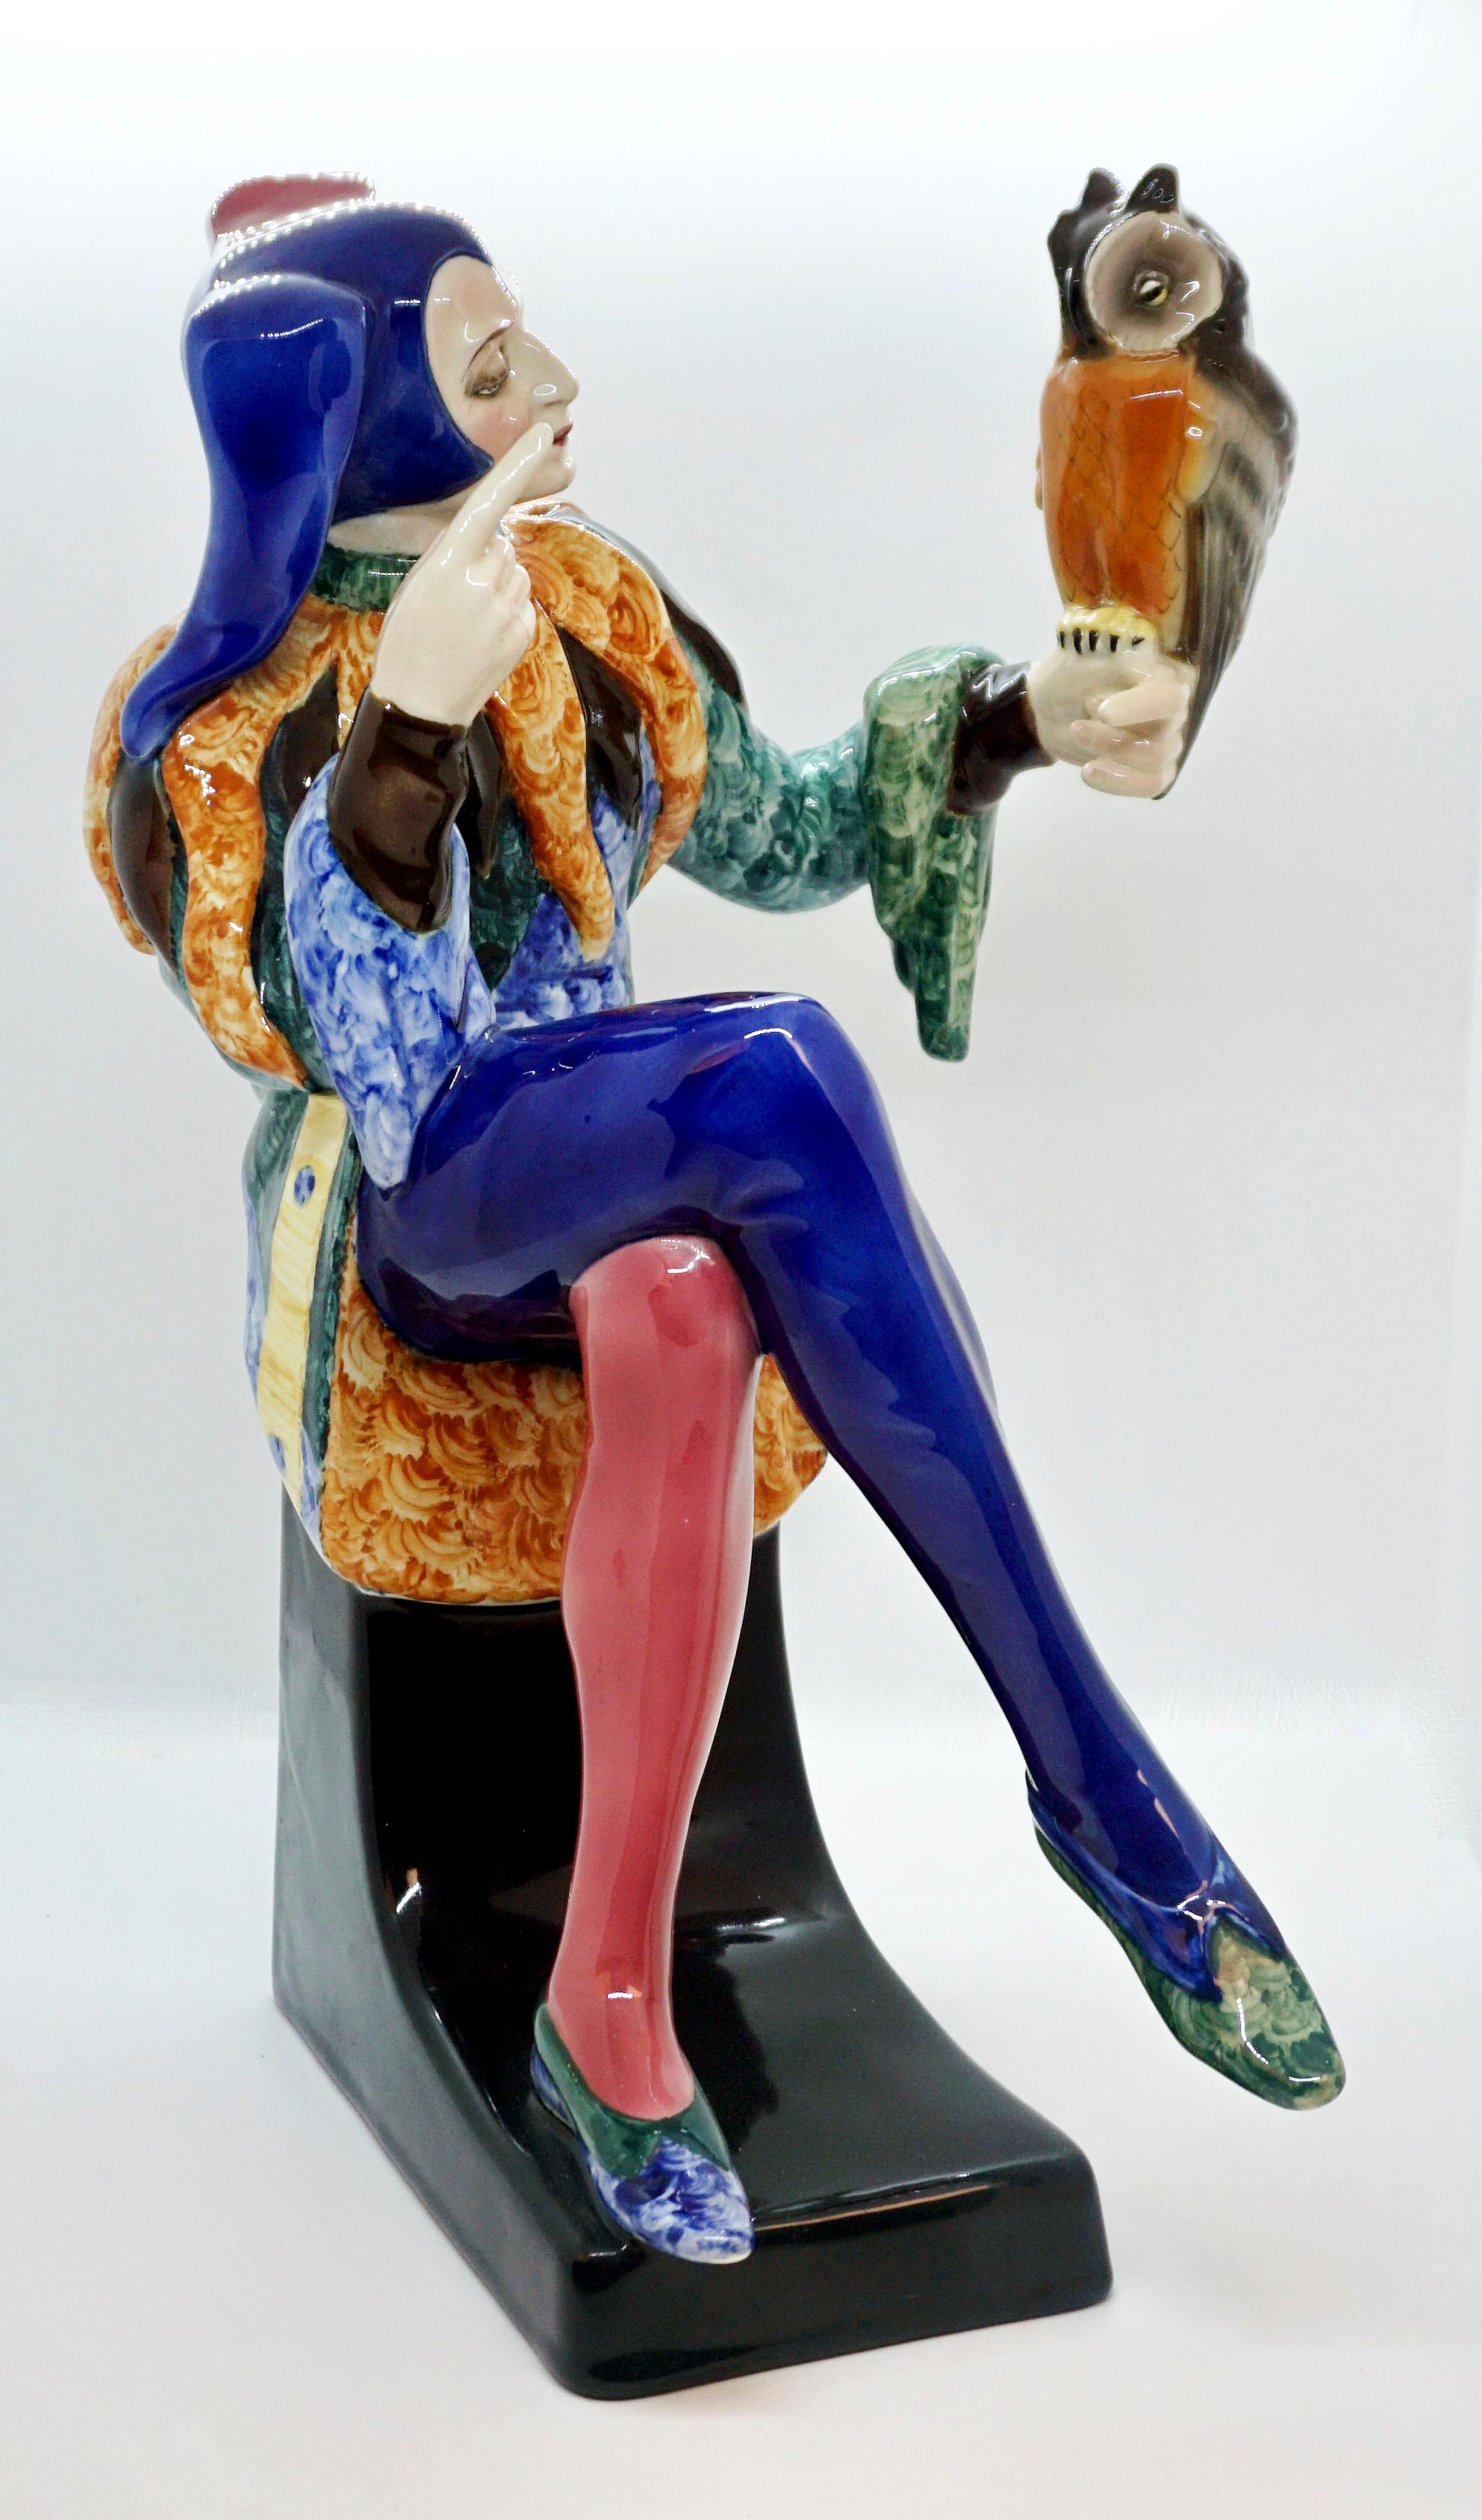 Exceptional Art Déco Goldscheider Figurine by Josef Lorenzl

Designed by Josef LORENZL (1892 - 1950), one of the most important designers having been active for Goldscheider manufactory in the period of 1920 - 1940.
Model 5509 was created